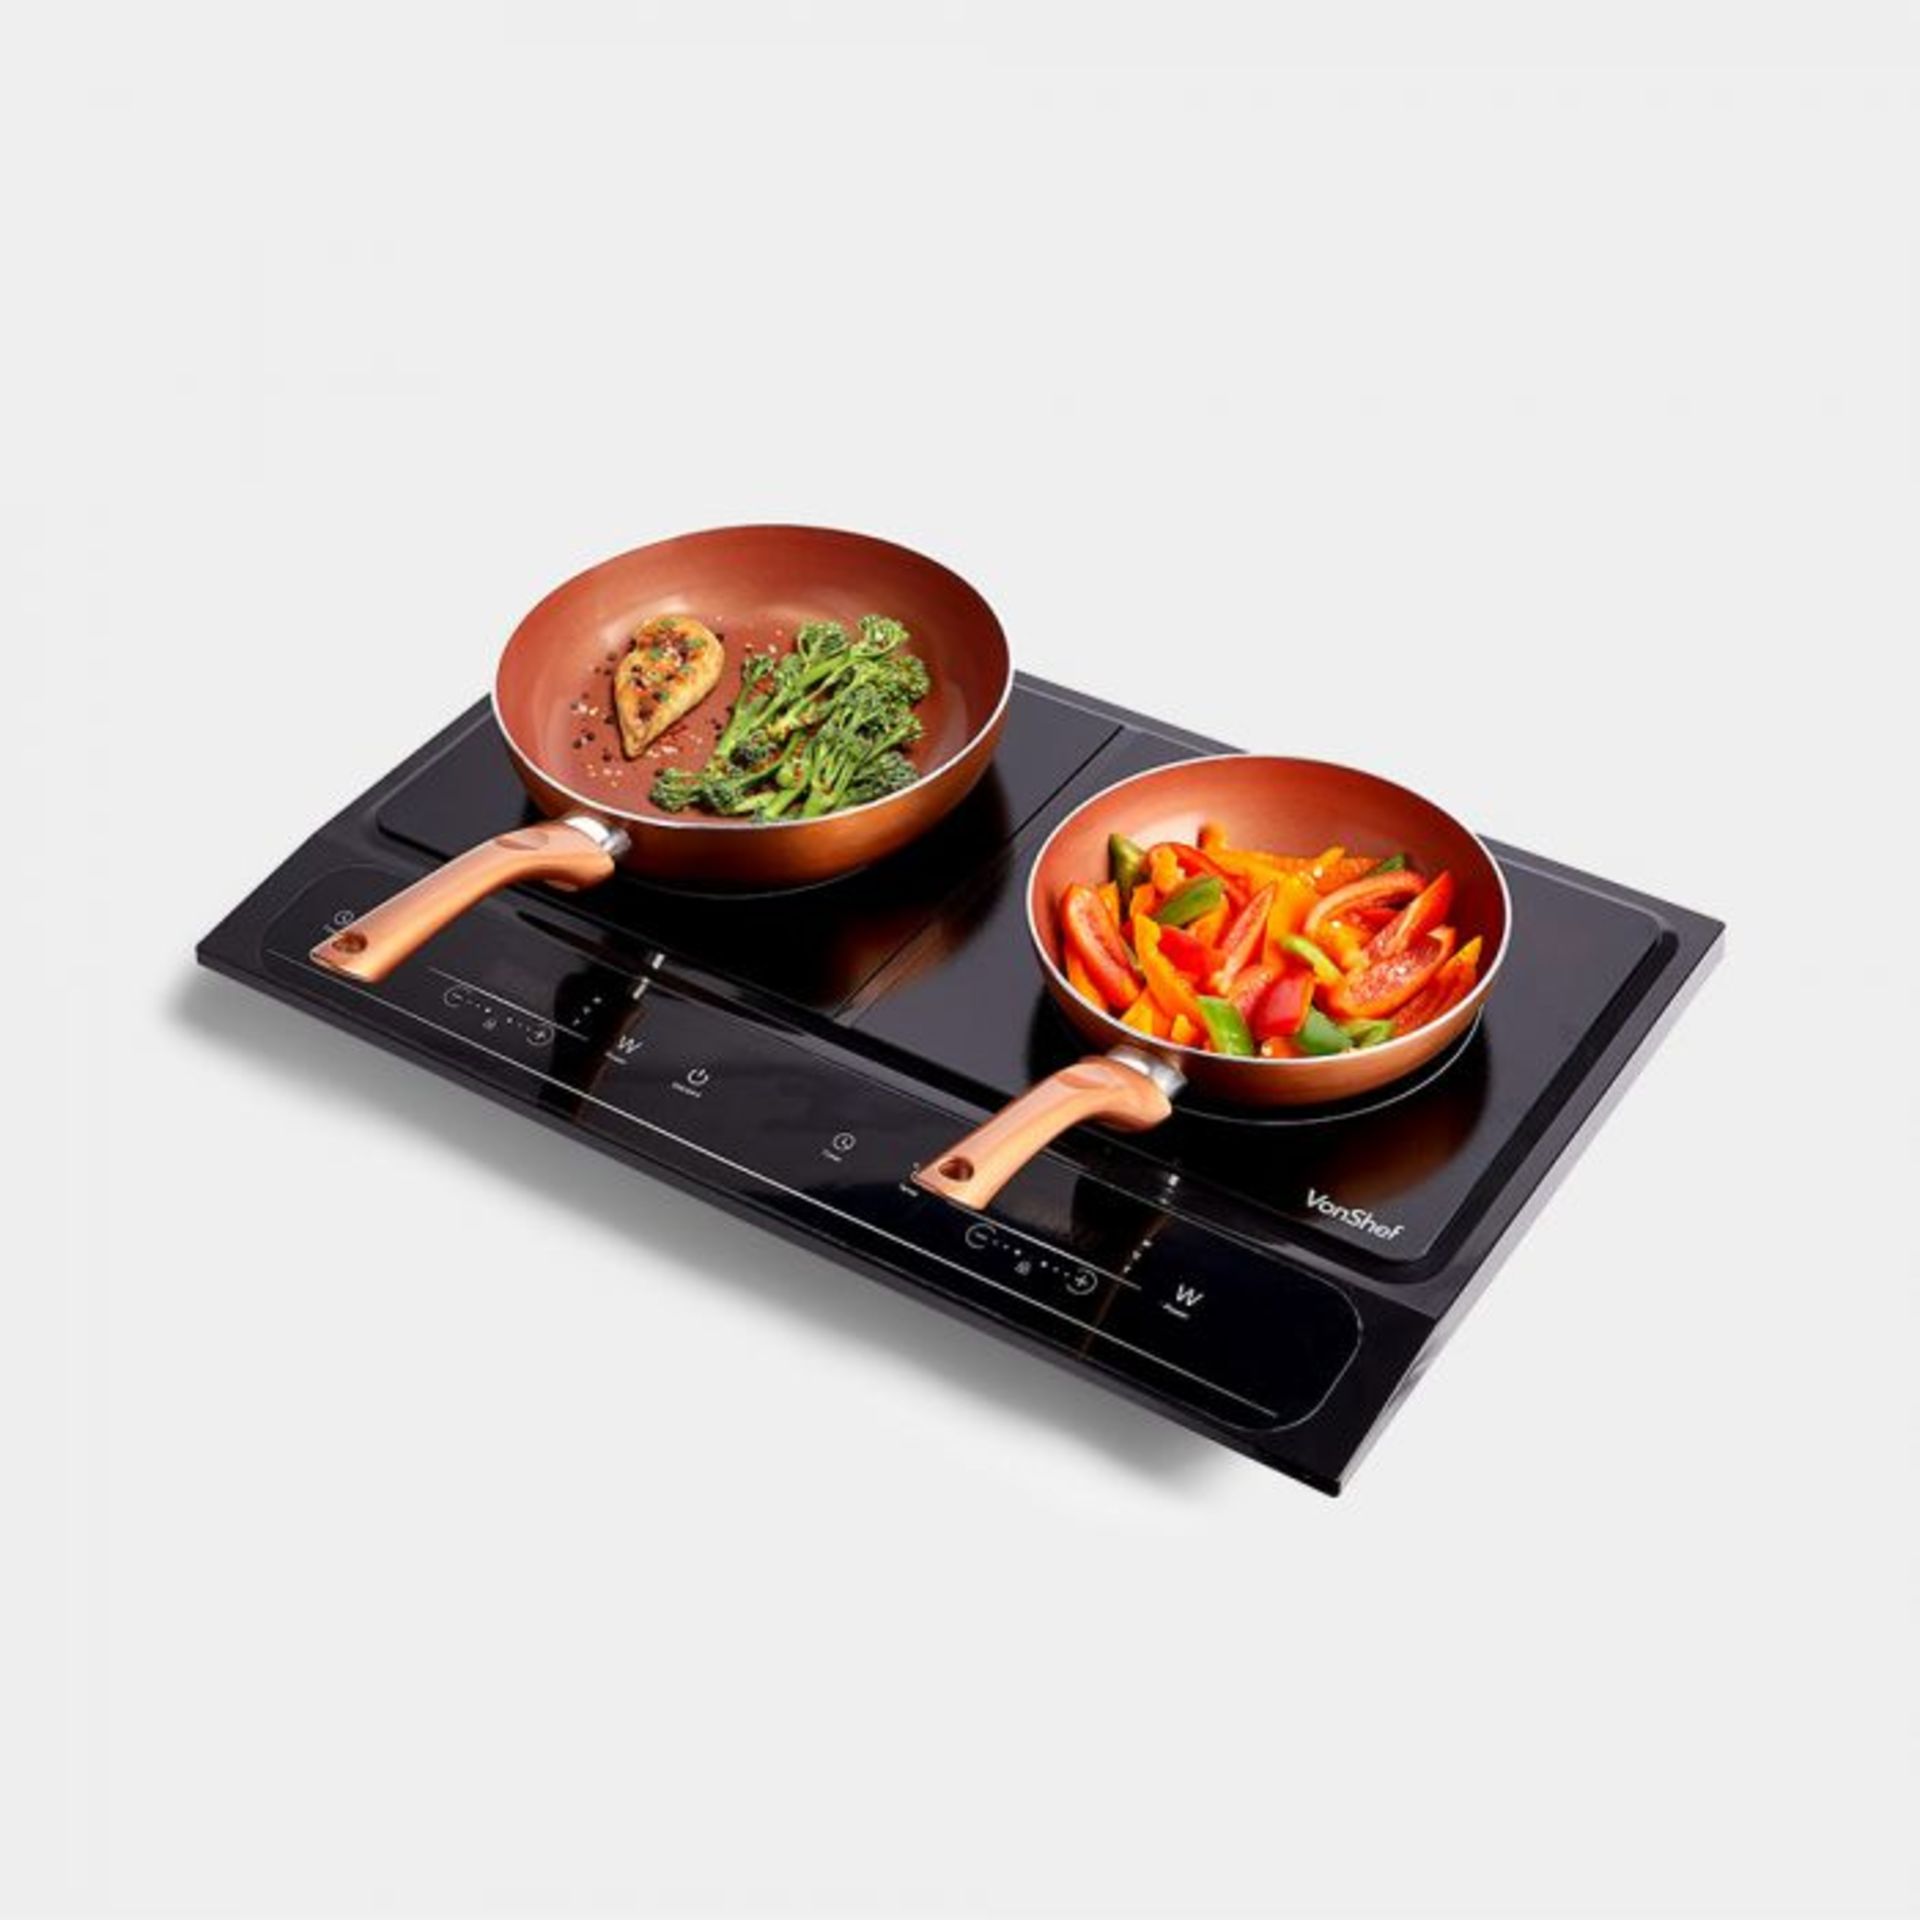 Dual Induction hob 2800W. No more scrubbing burnt food off your cooker, an induction hob directly